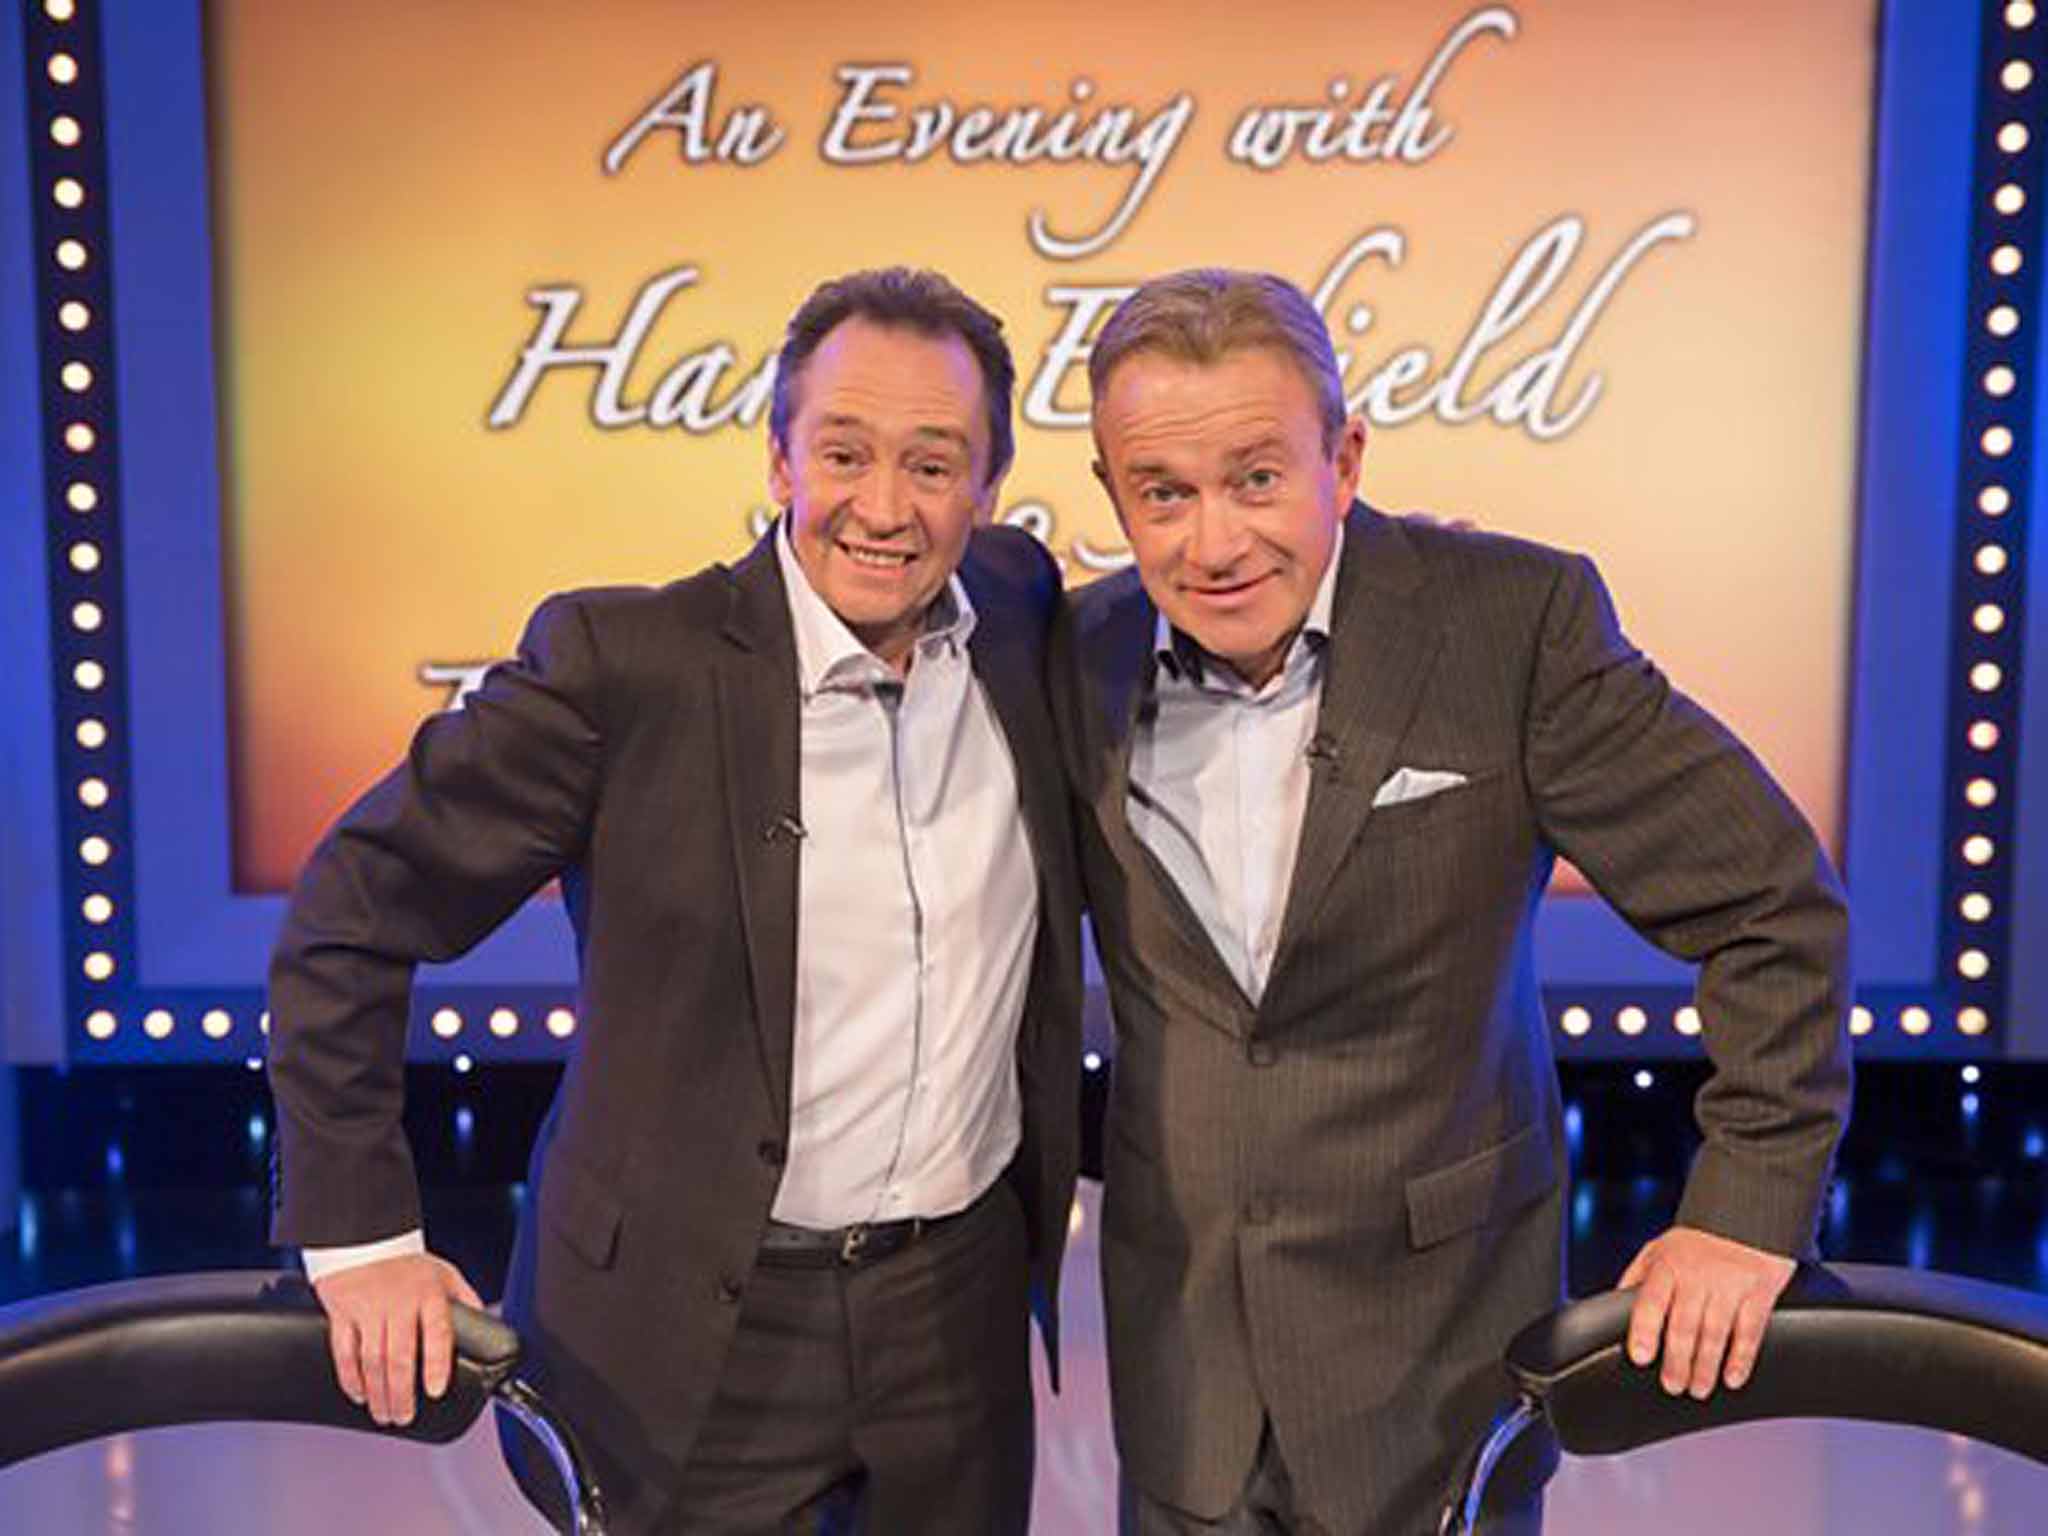 An Evening with Harry Enfield and Paul Whitehouse